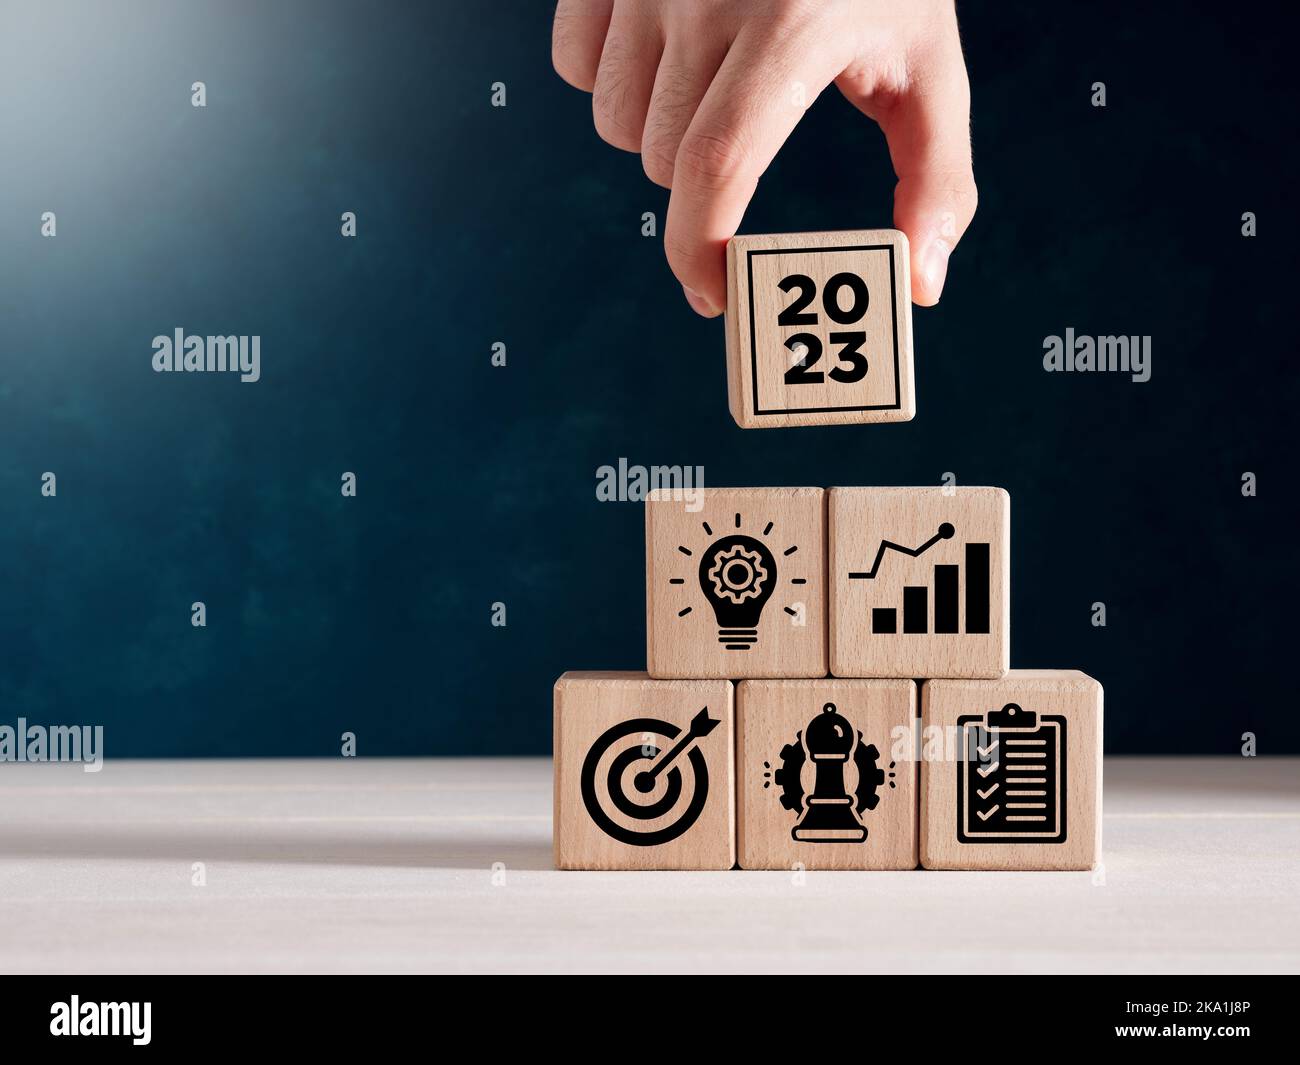 Year 2023 business goals, strategy, action plan and vision concept Business development or achieving business goals. Hand puts the stacked wooden cube Stock Photo